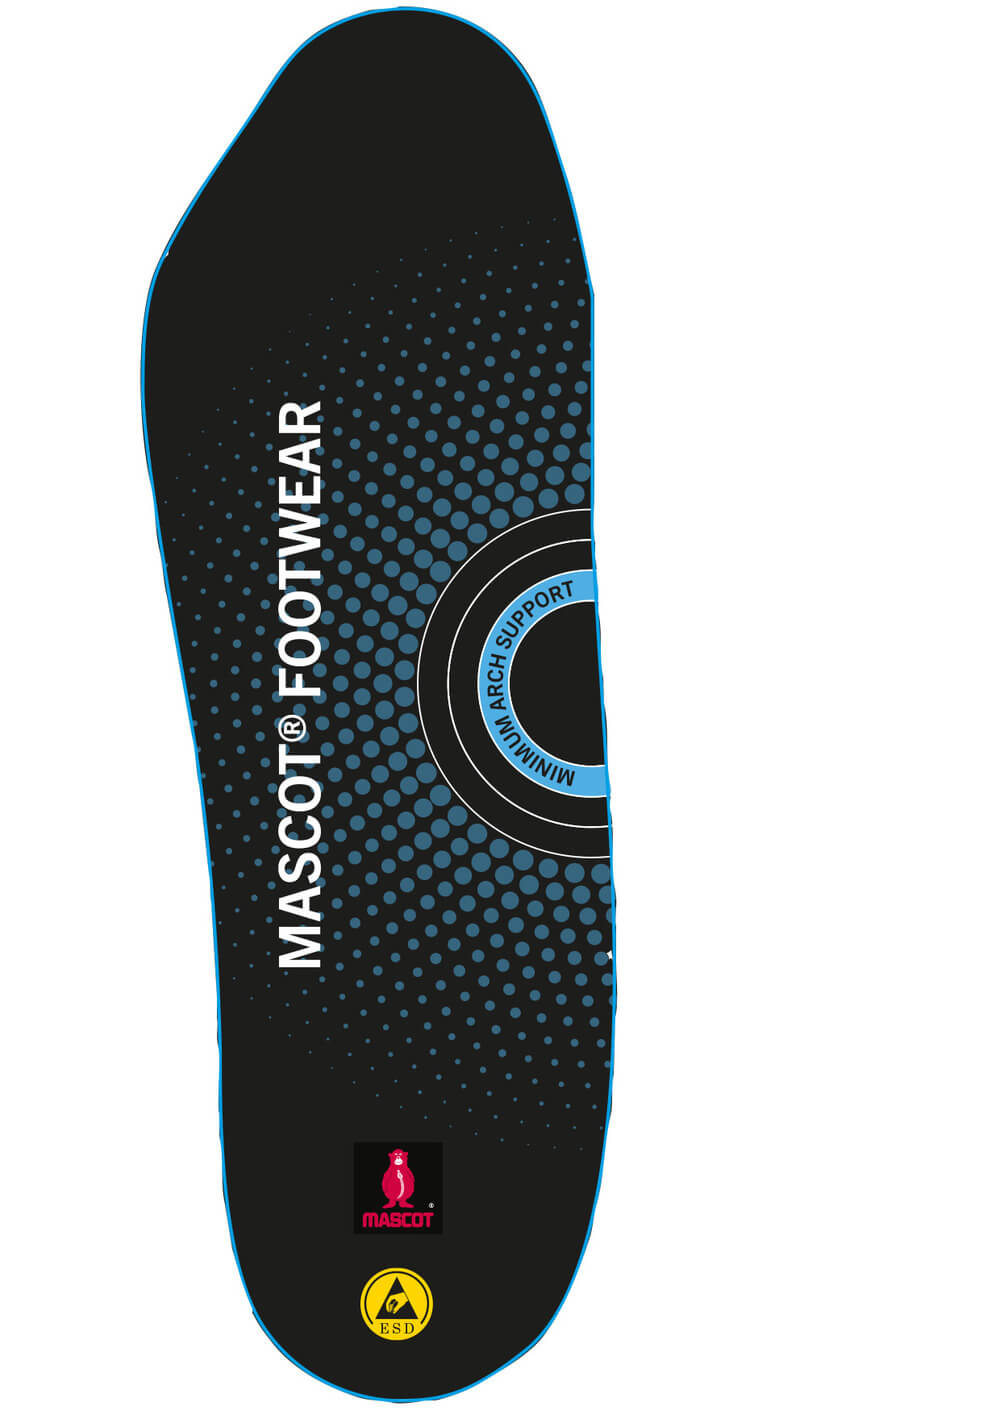 MASCOT®FOOTWEAR ACCESSORIES Insoles  FT090 - DaltonSafety